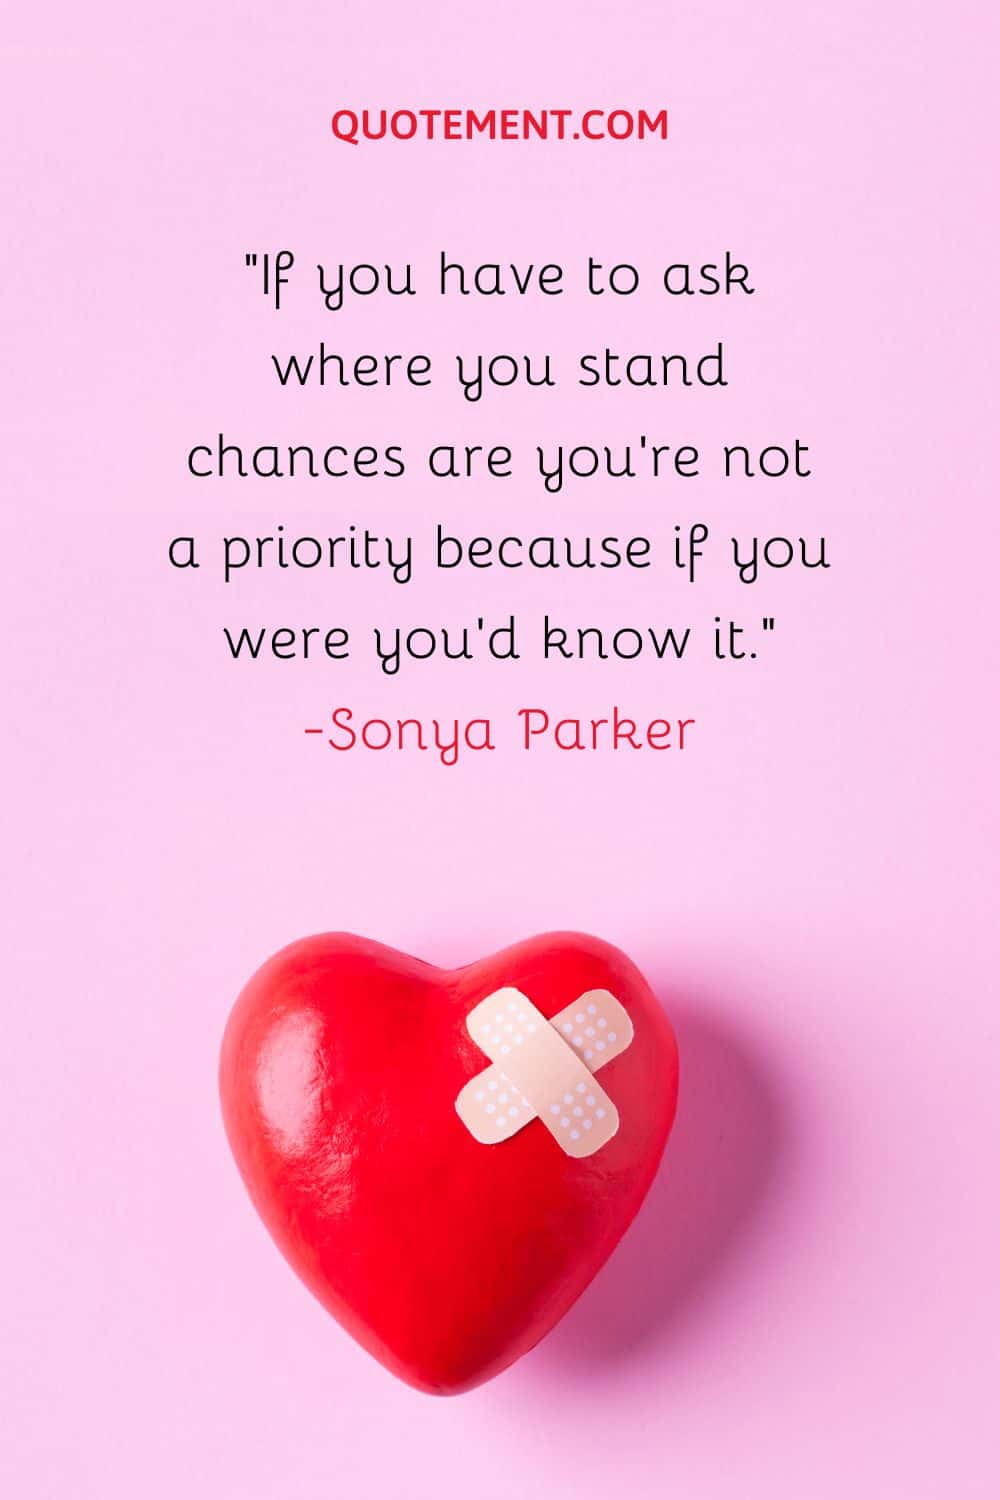 If you have to ask where you stand chances are you’re not a priority because if you were you’d know it